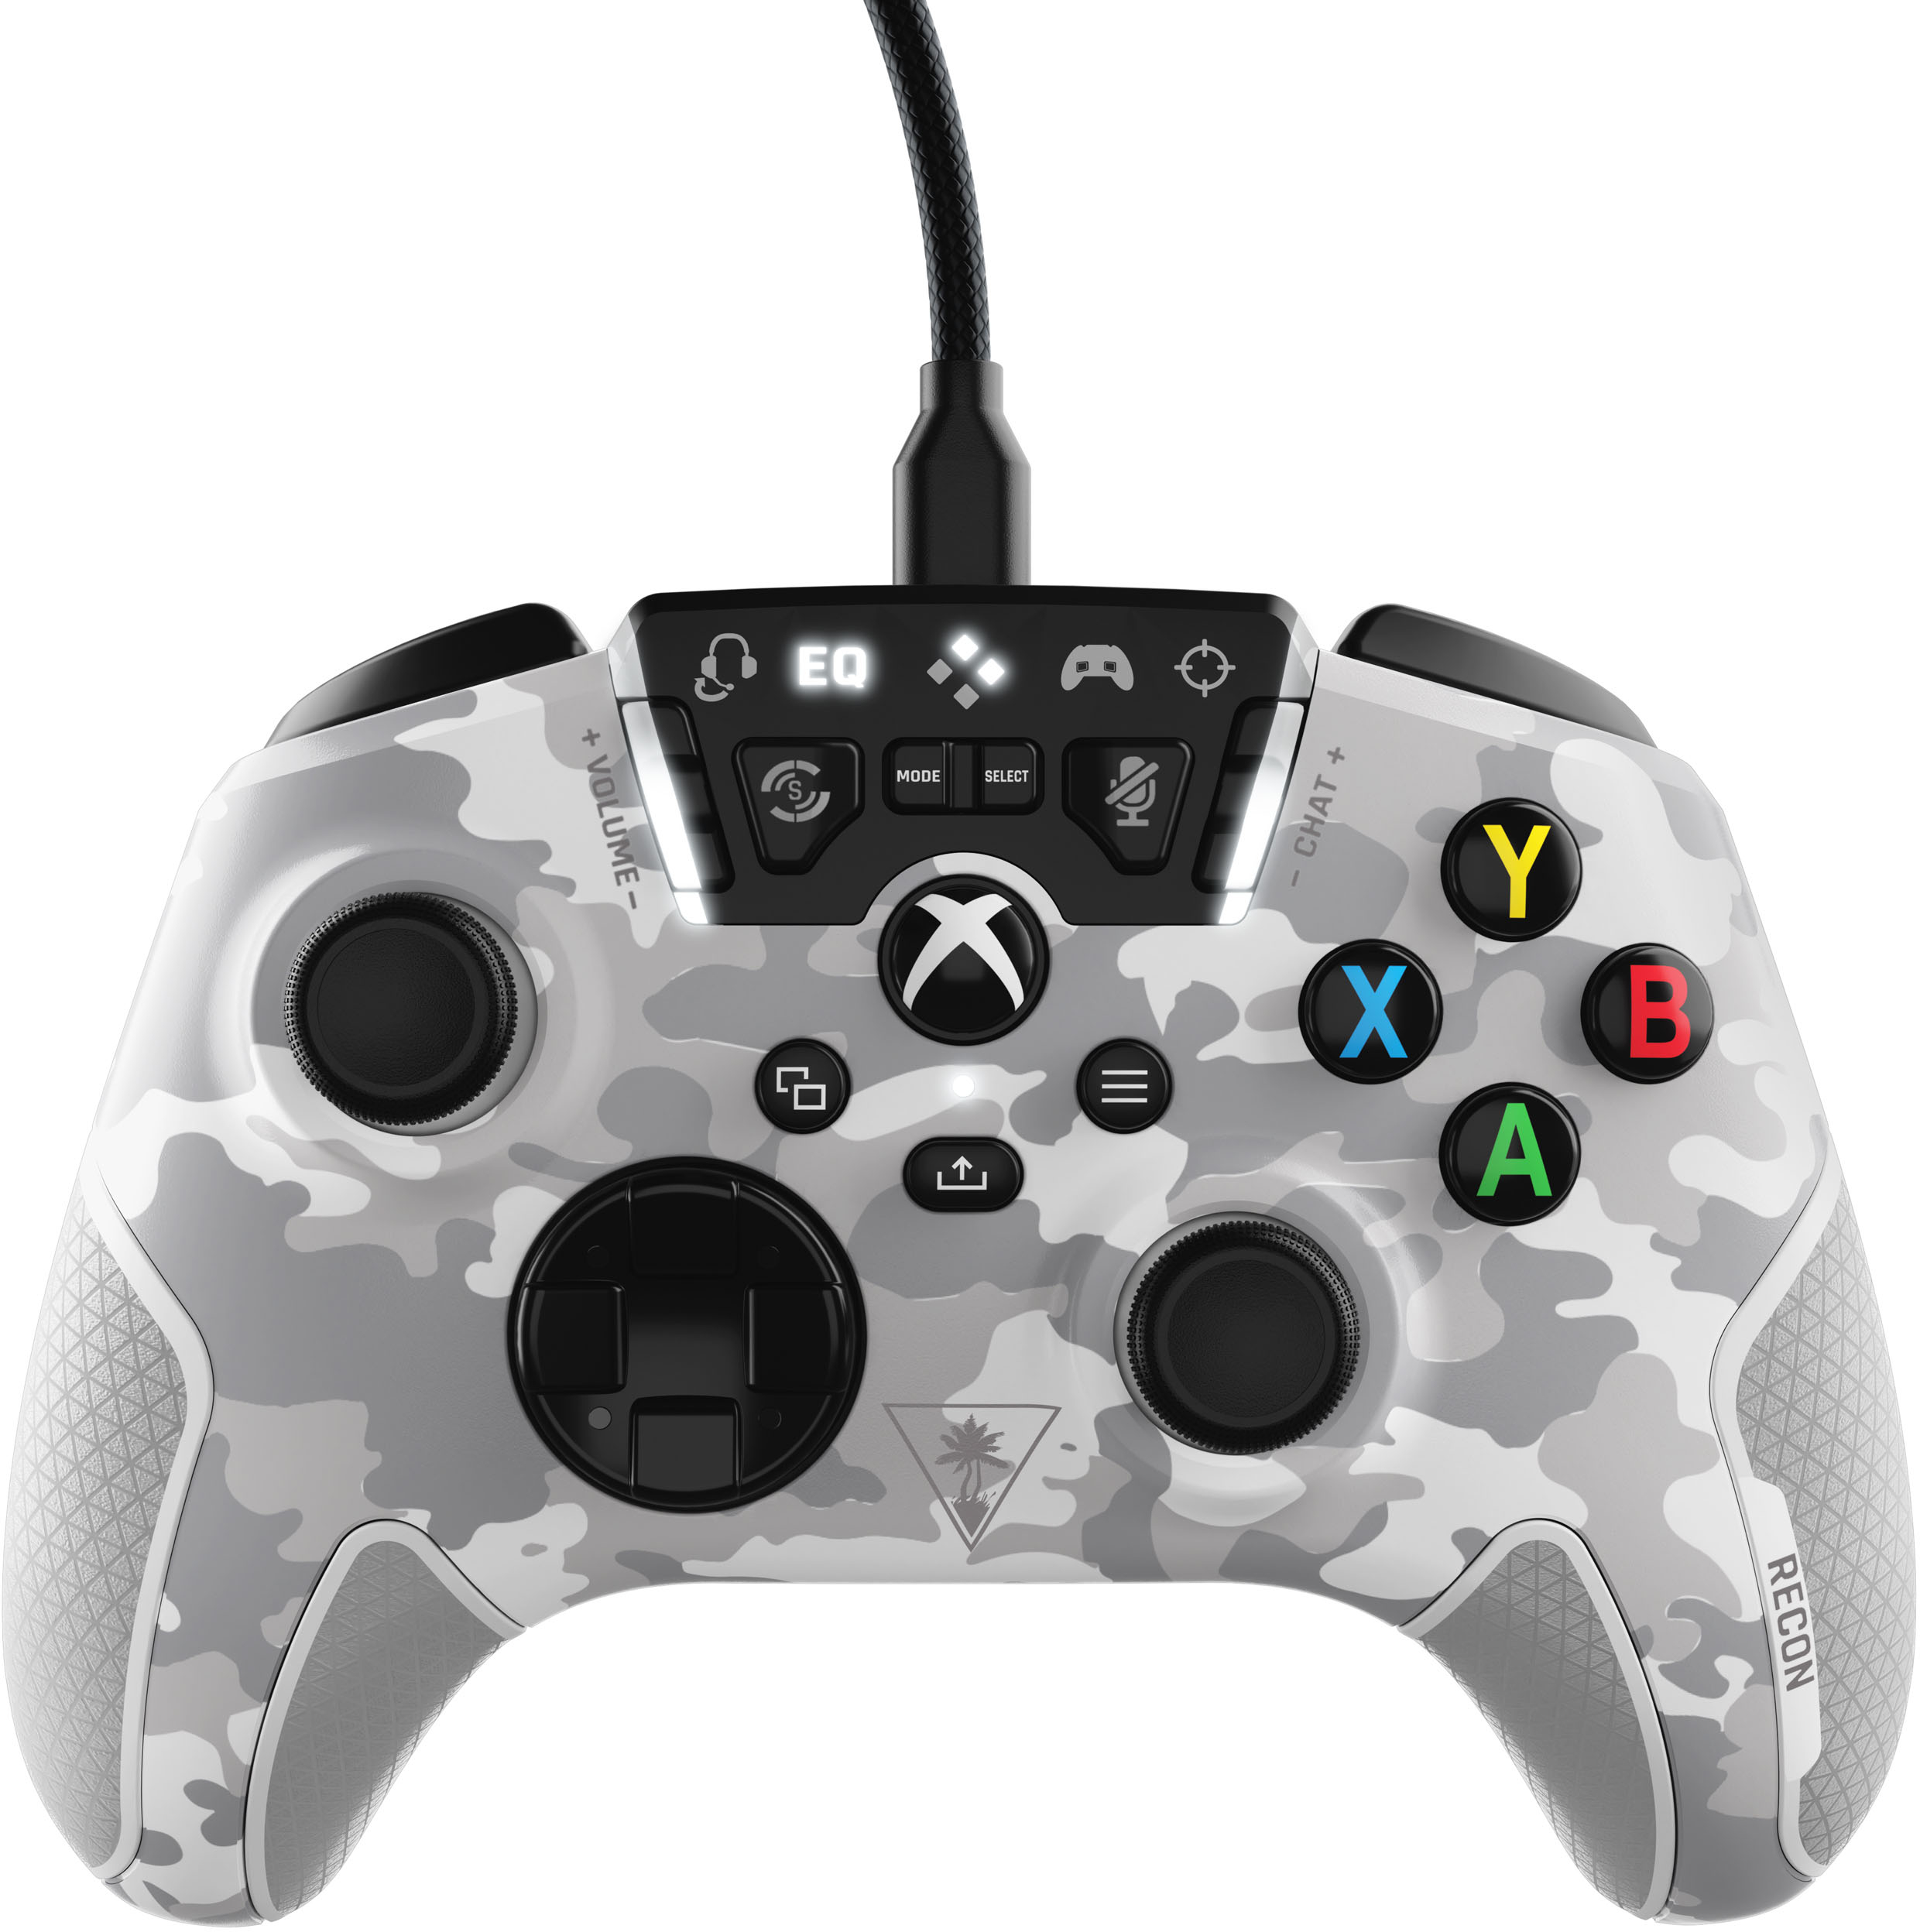 Turtle Beach Xbox Arctic Best Series Buy Controller PCs Camo Buttons Remappable Recon Wired Series X, Xbox S, One Xbox Windows TBS-0707-01 for Controller with - 